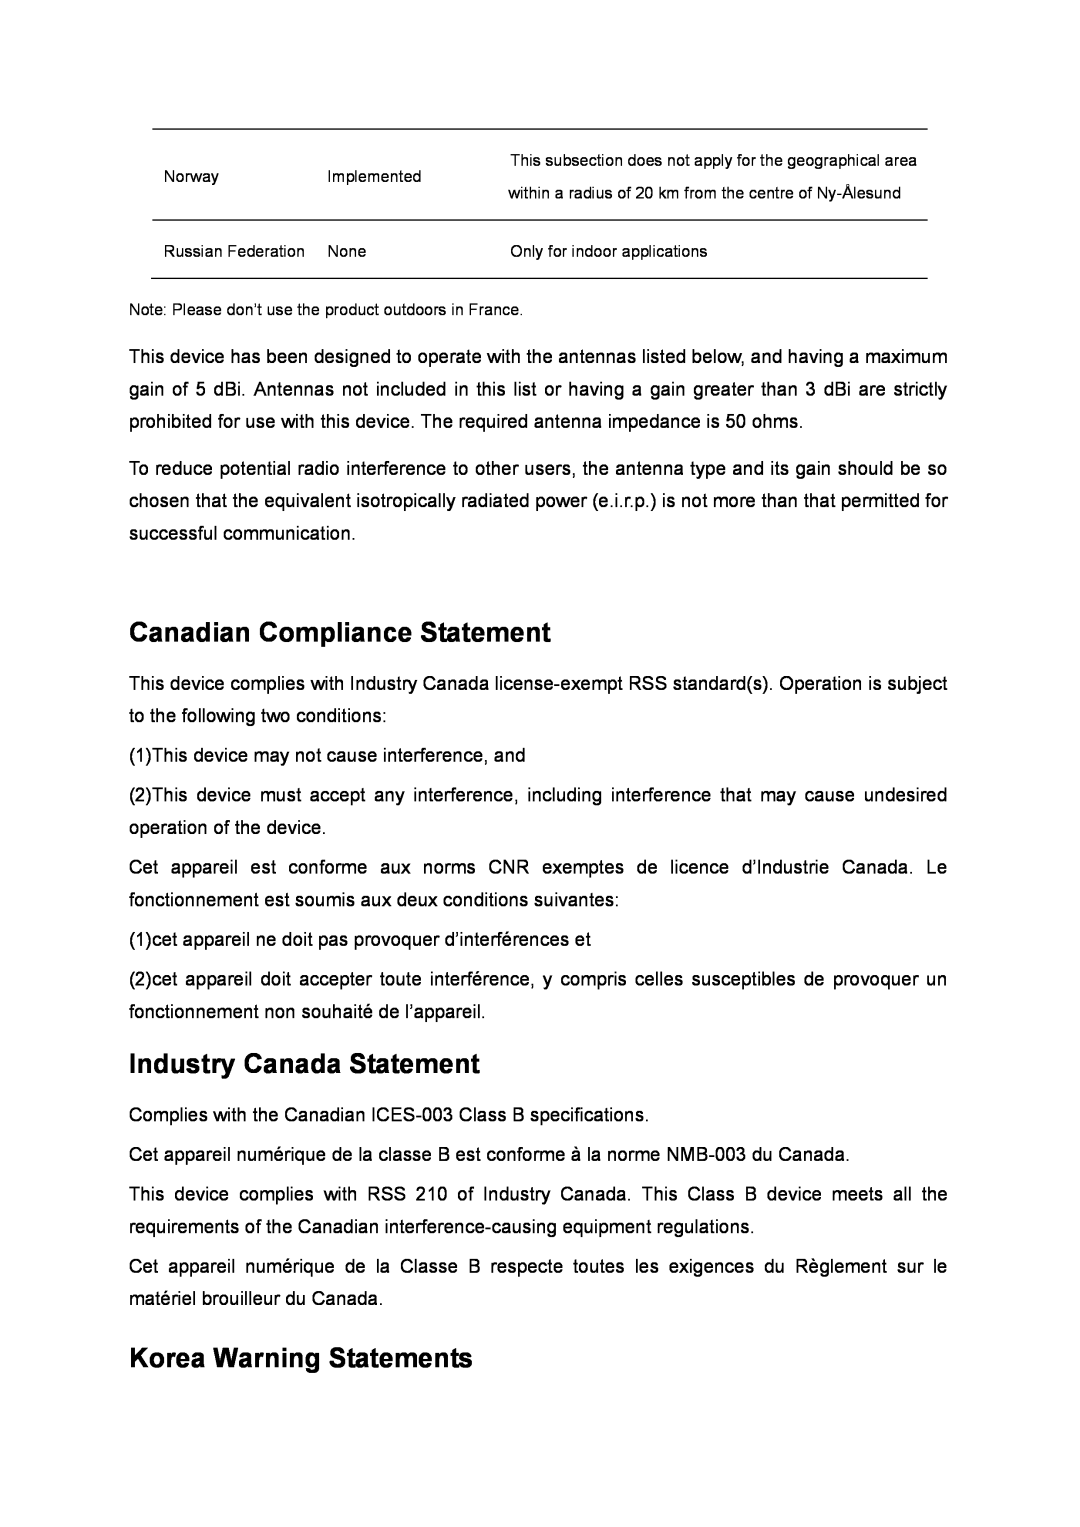 TP-Link AC1200 manual Canadian Compliance Statement, Industry Canada Statement, Korea Warning Statements 